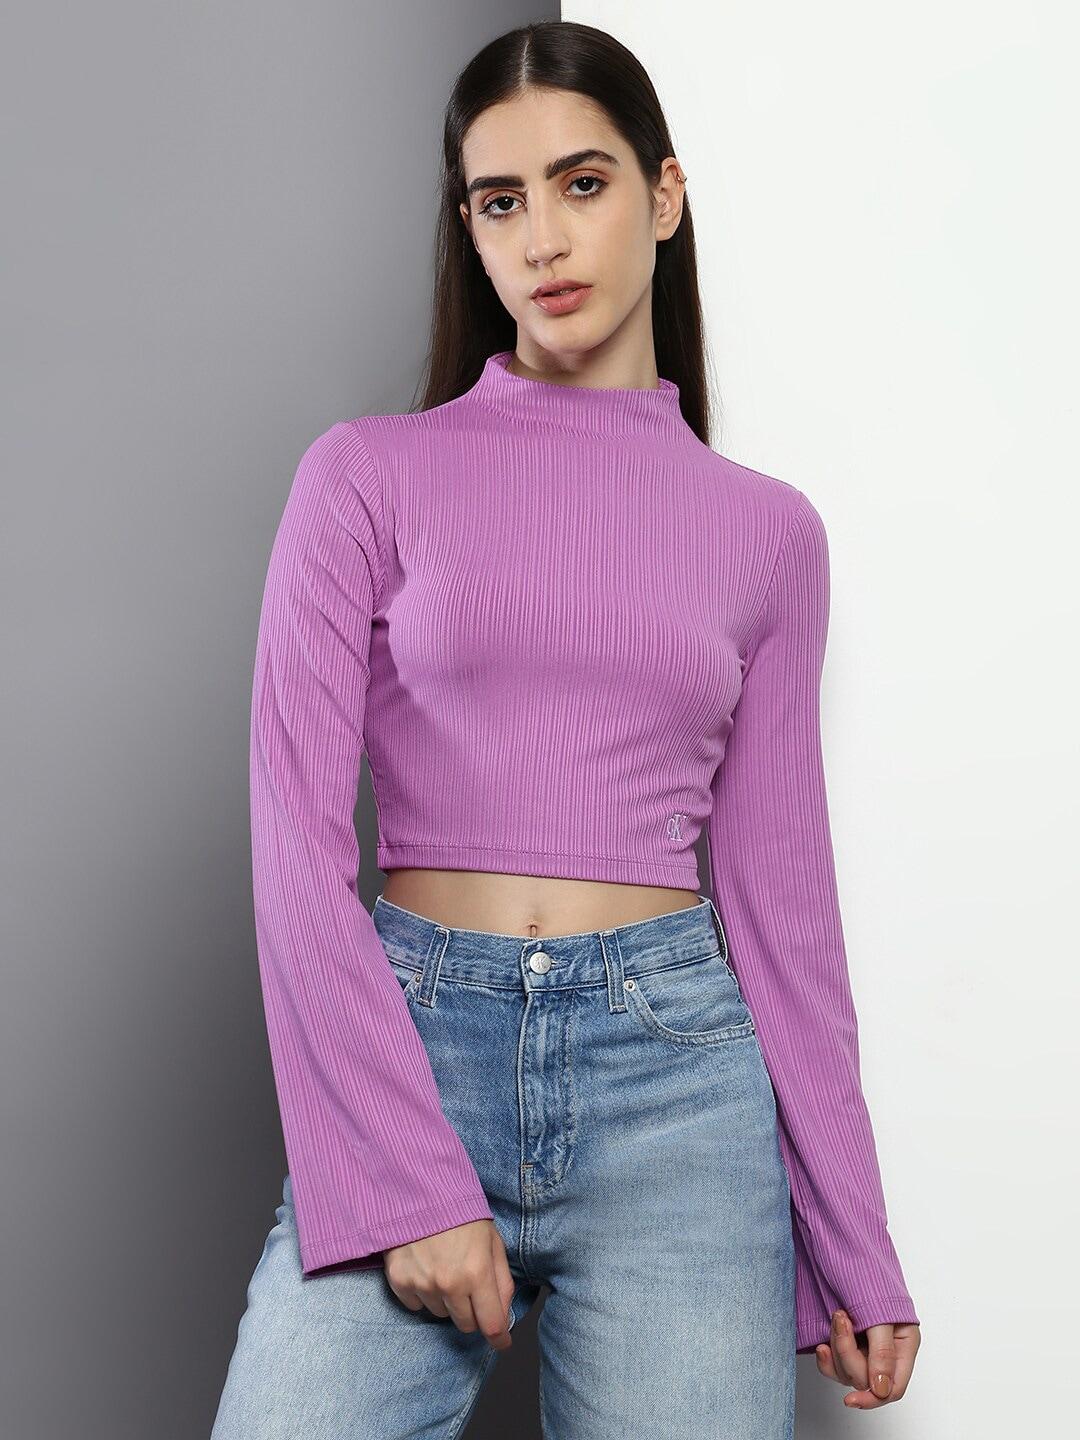 calvin klein jeans high neck flared sleeves striped crop top